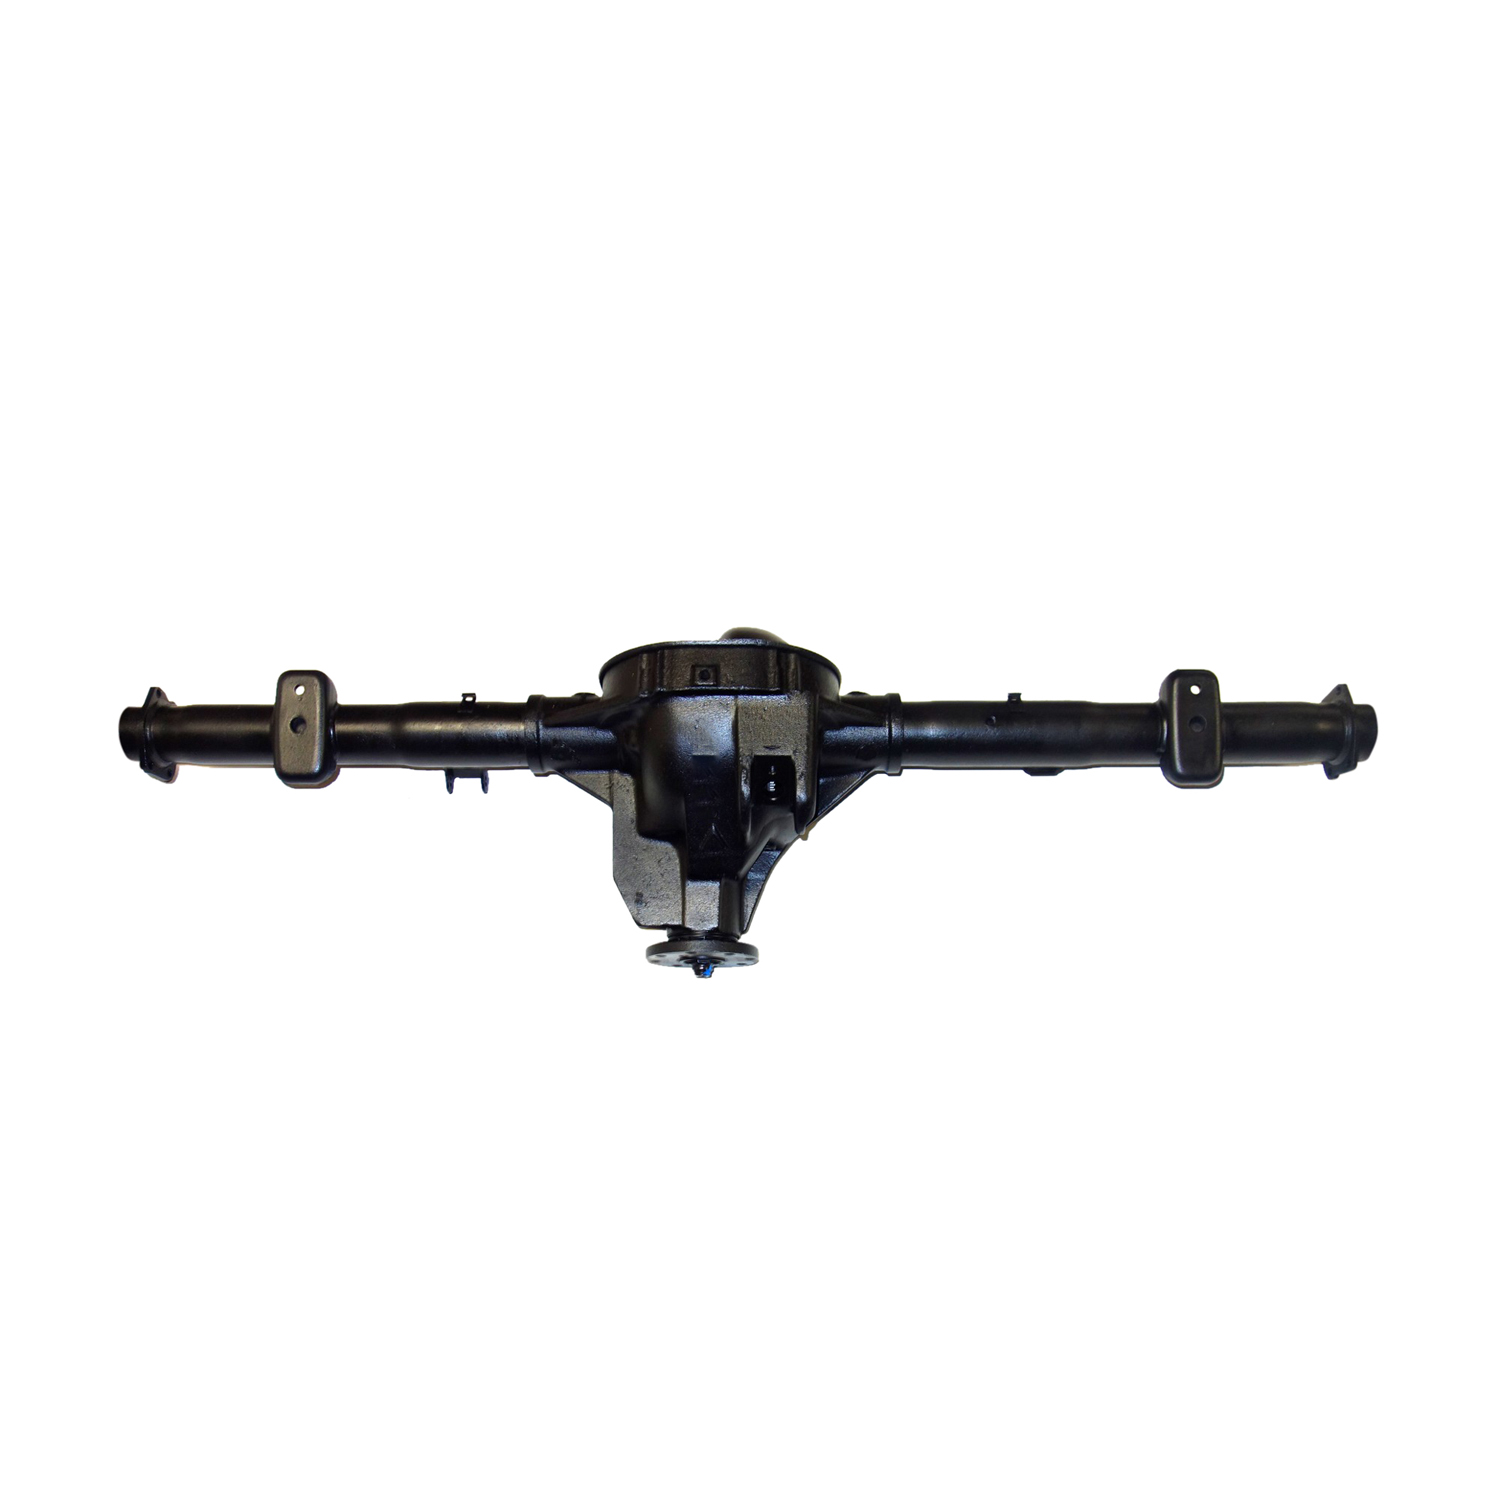 Reman Axle Assembly Ford 8.8" 95-01 Ford Explorer, Exc Sport Trac, 3.27